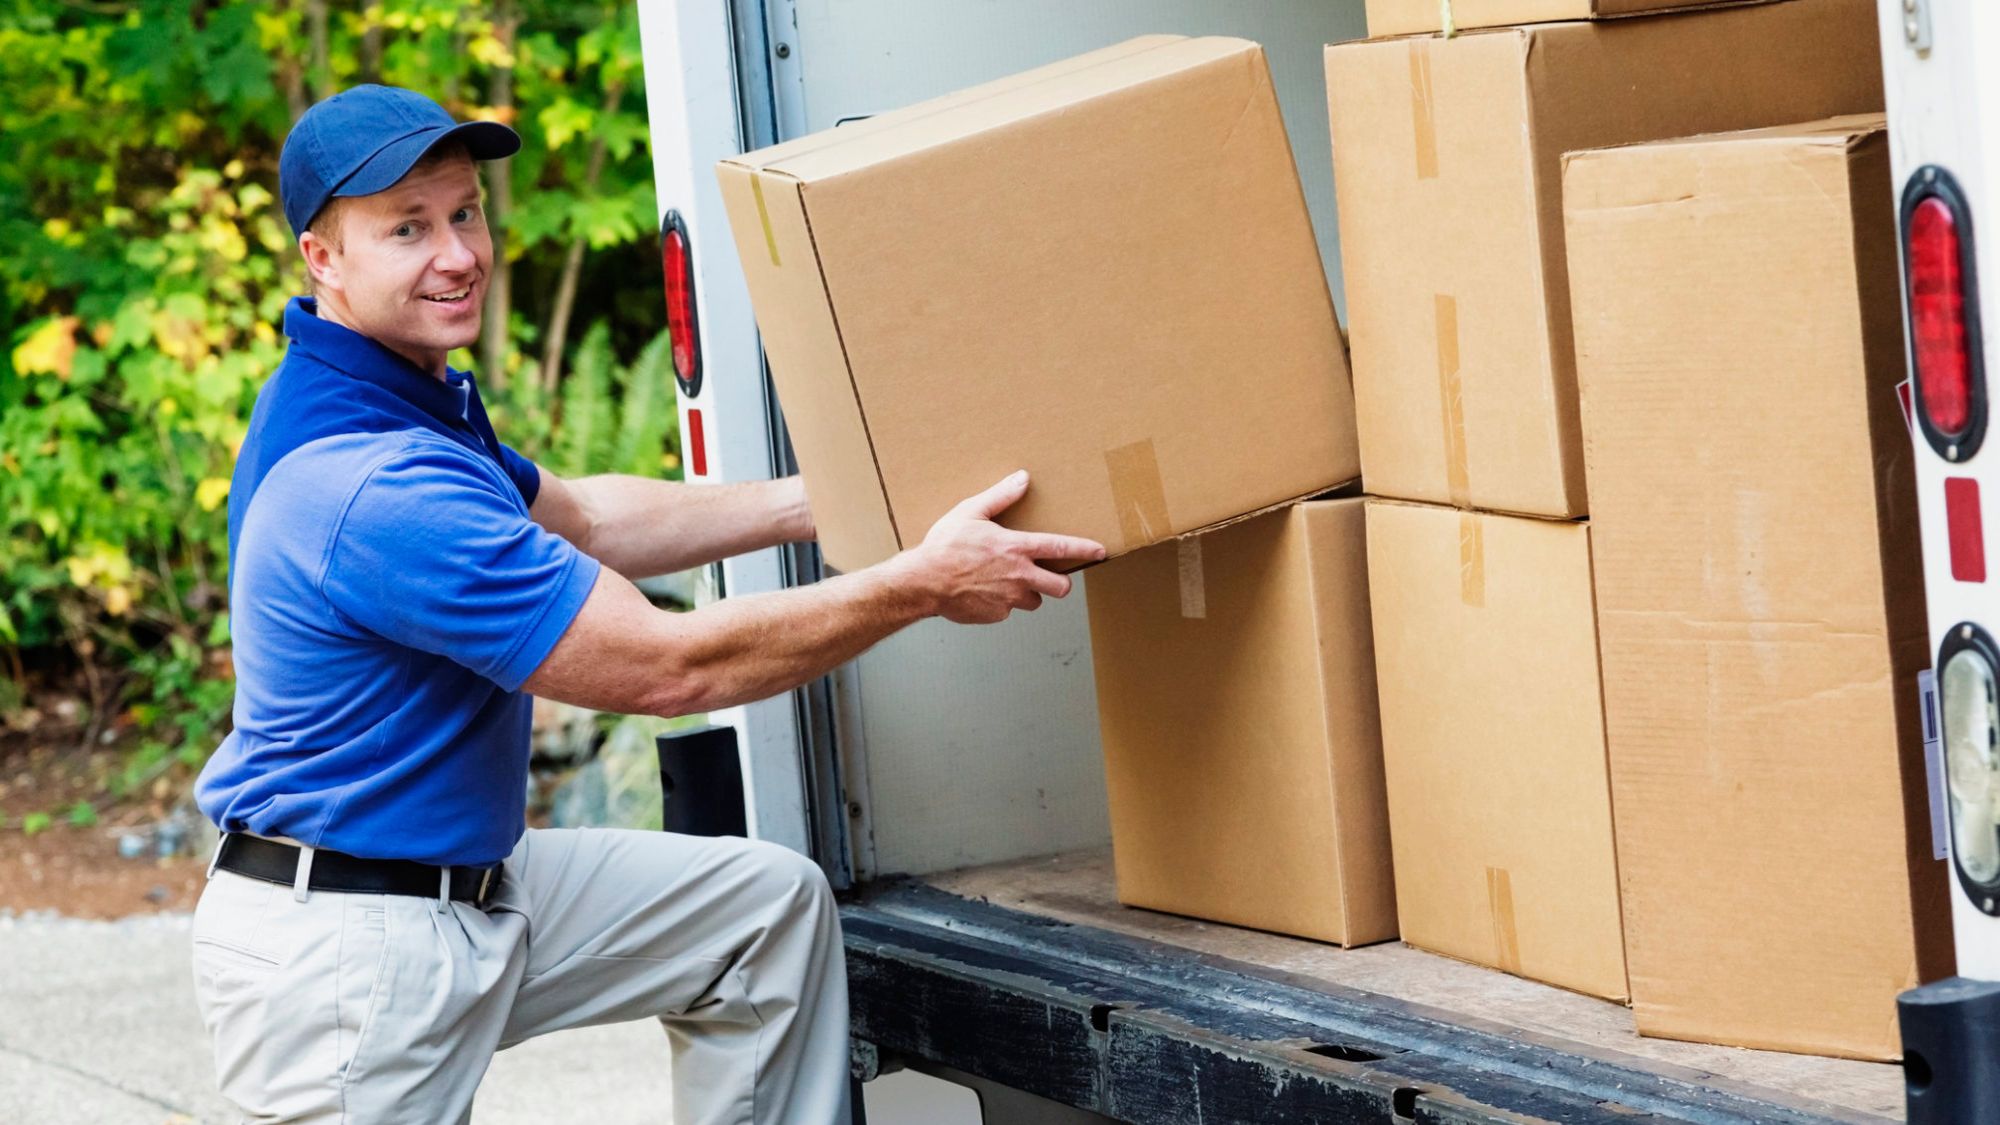 A movers company's employee moving cartons in a van